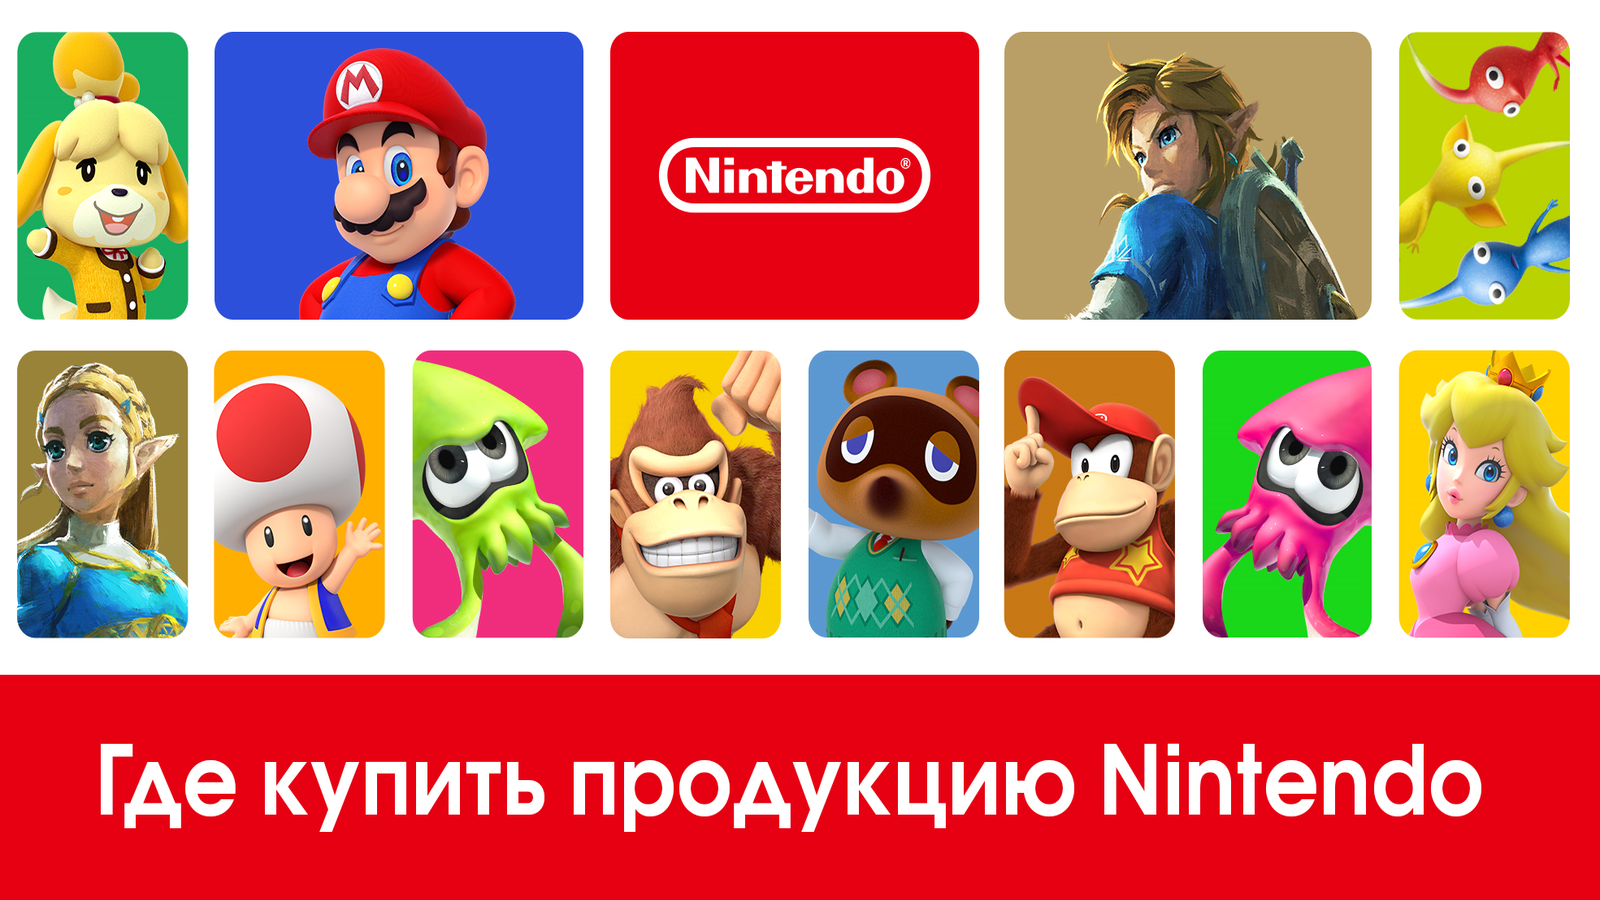 Nintendo eShop to effectively shut down in Russia : r/NintendoSwitch